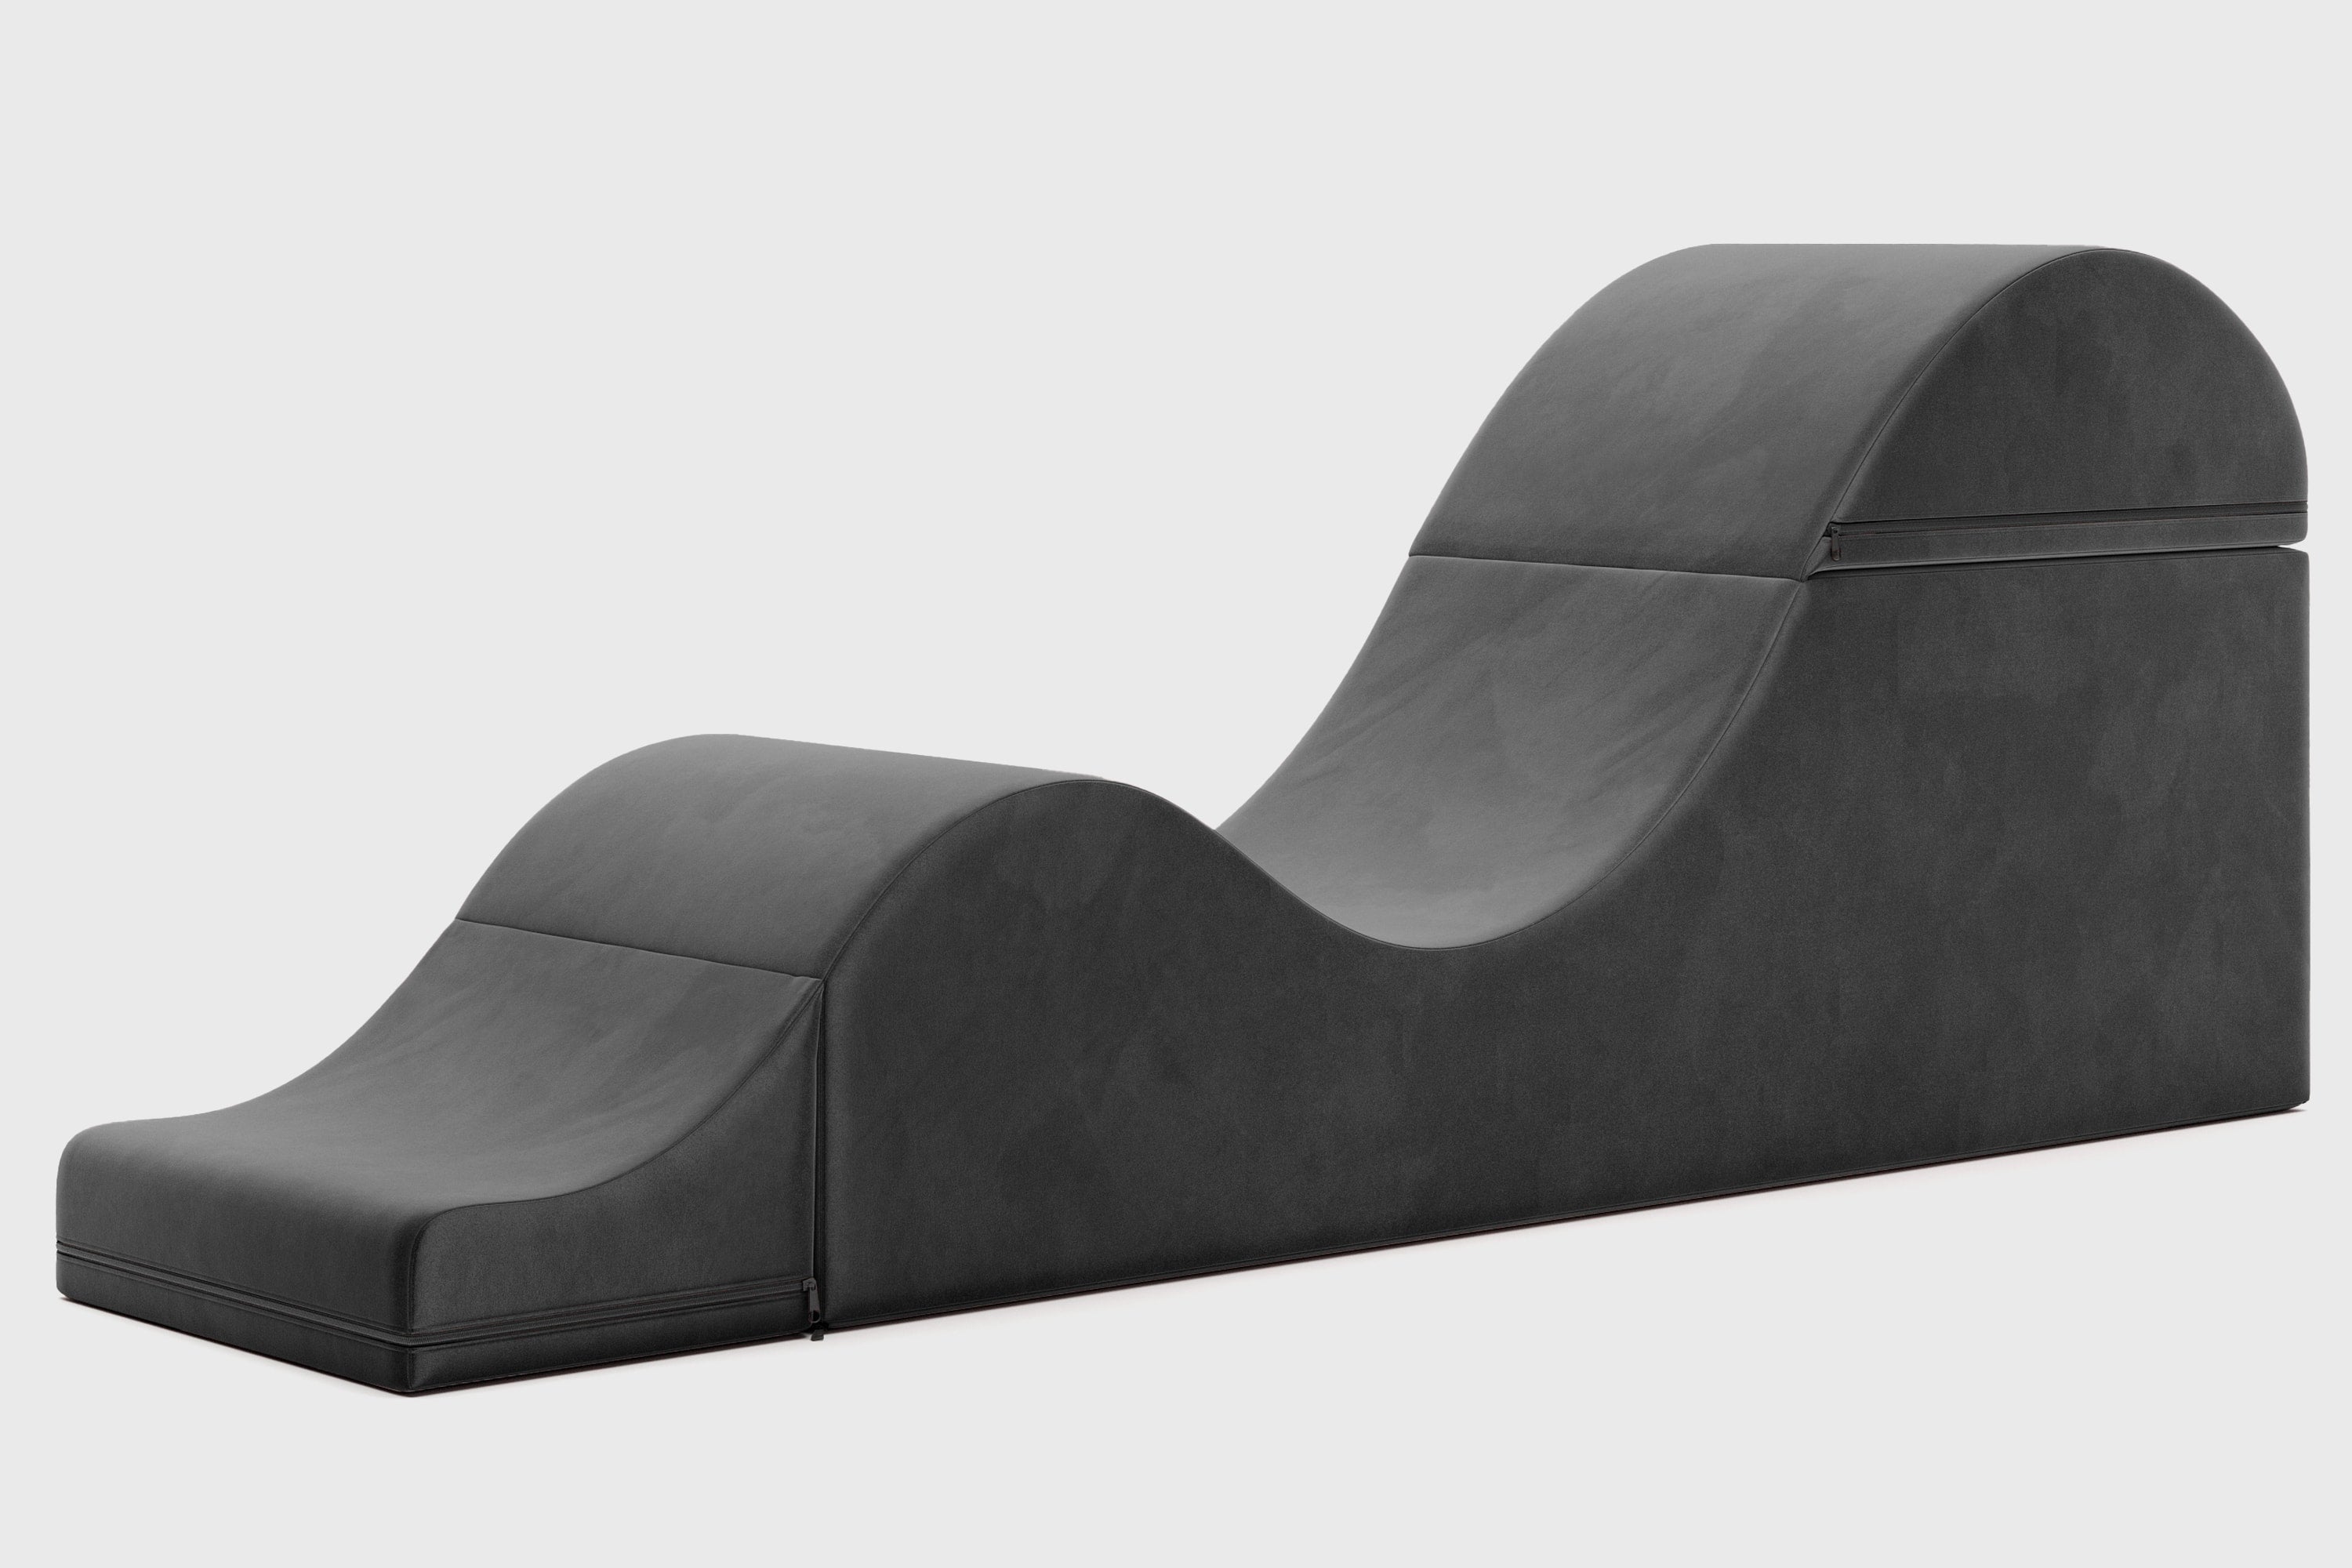 ARIA Convertible Chaise & Bench | Melody's Room